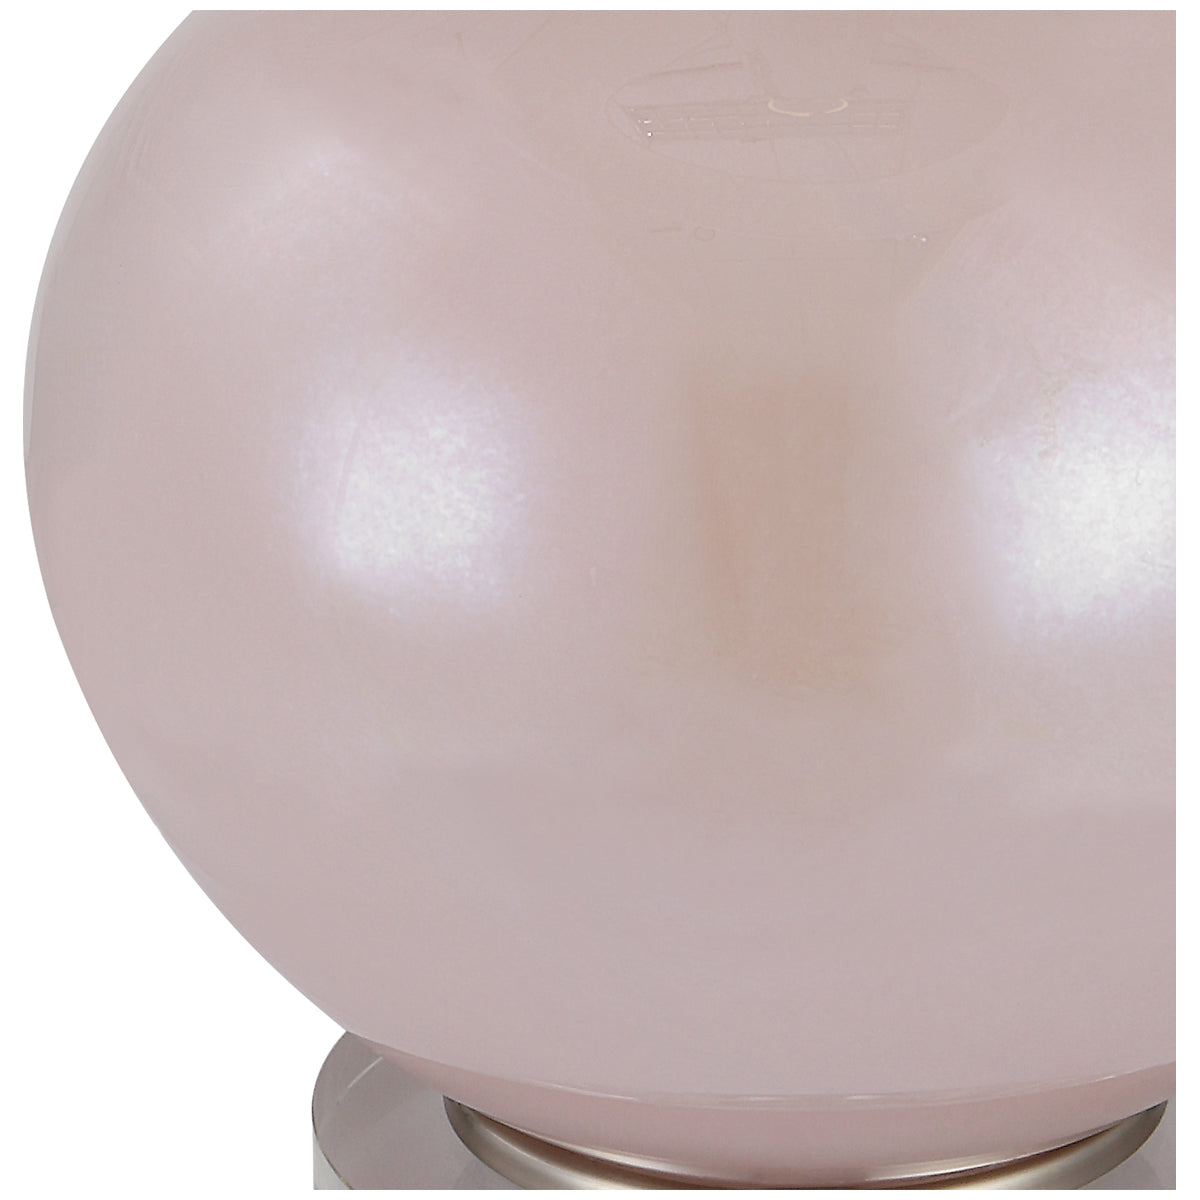 Uttermost Rosa Pink Glass Table Lamp